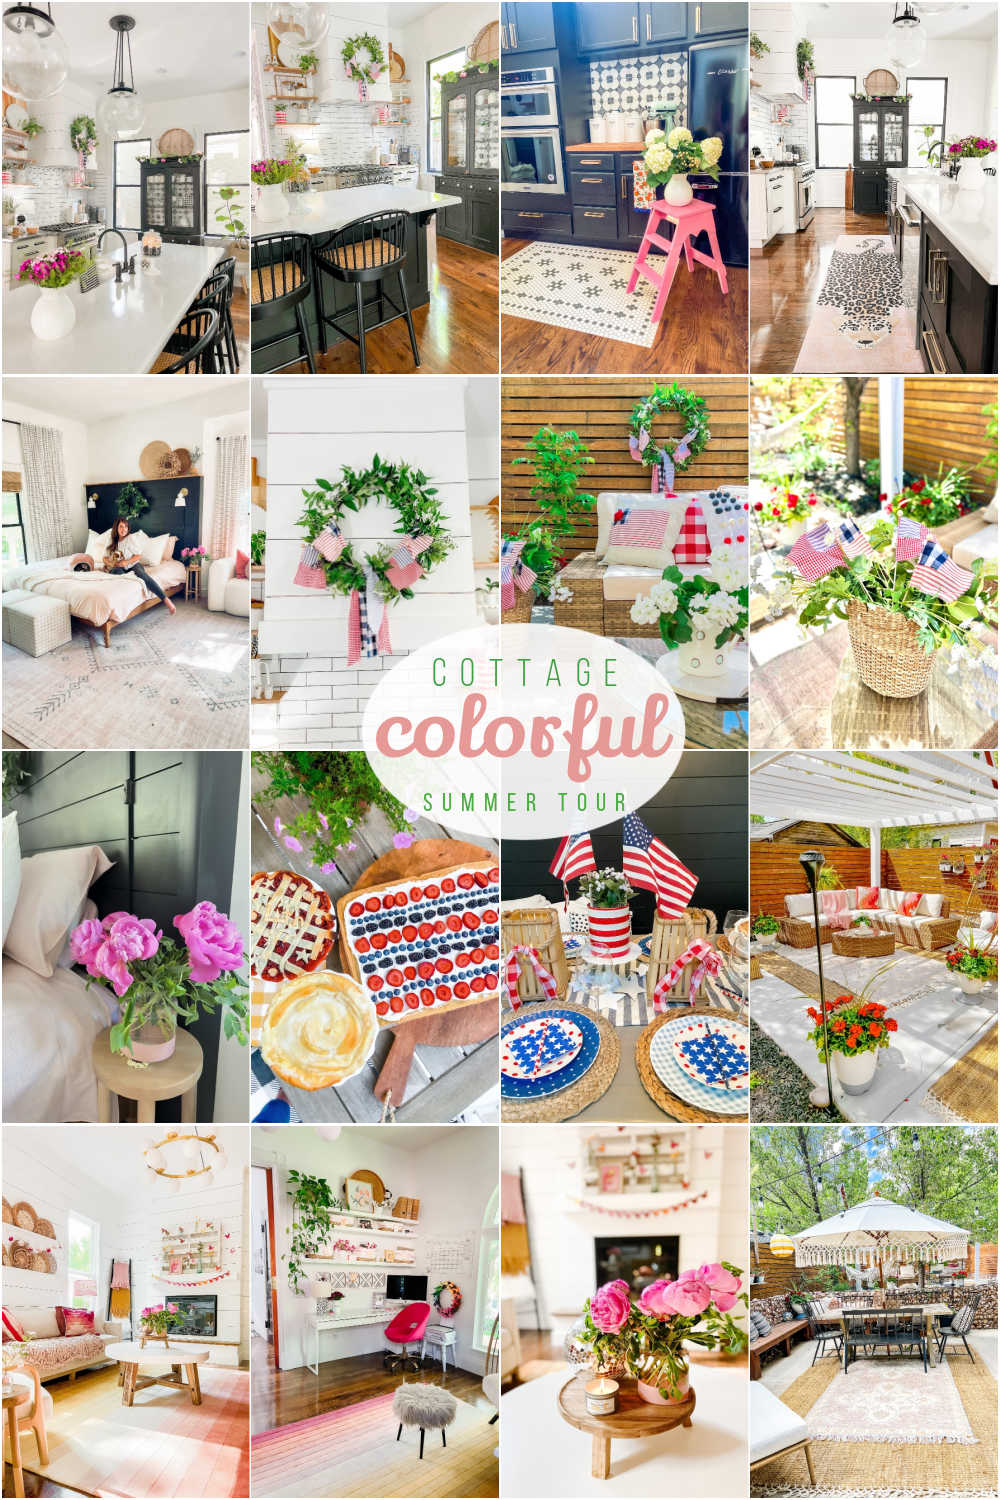 Colorful Cottage Summer Tour. Add some summer color to your home with these easy bright ideas!